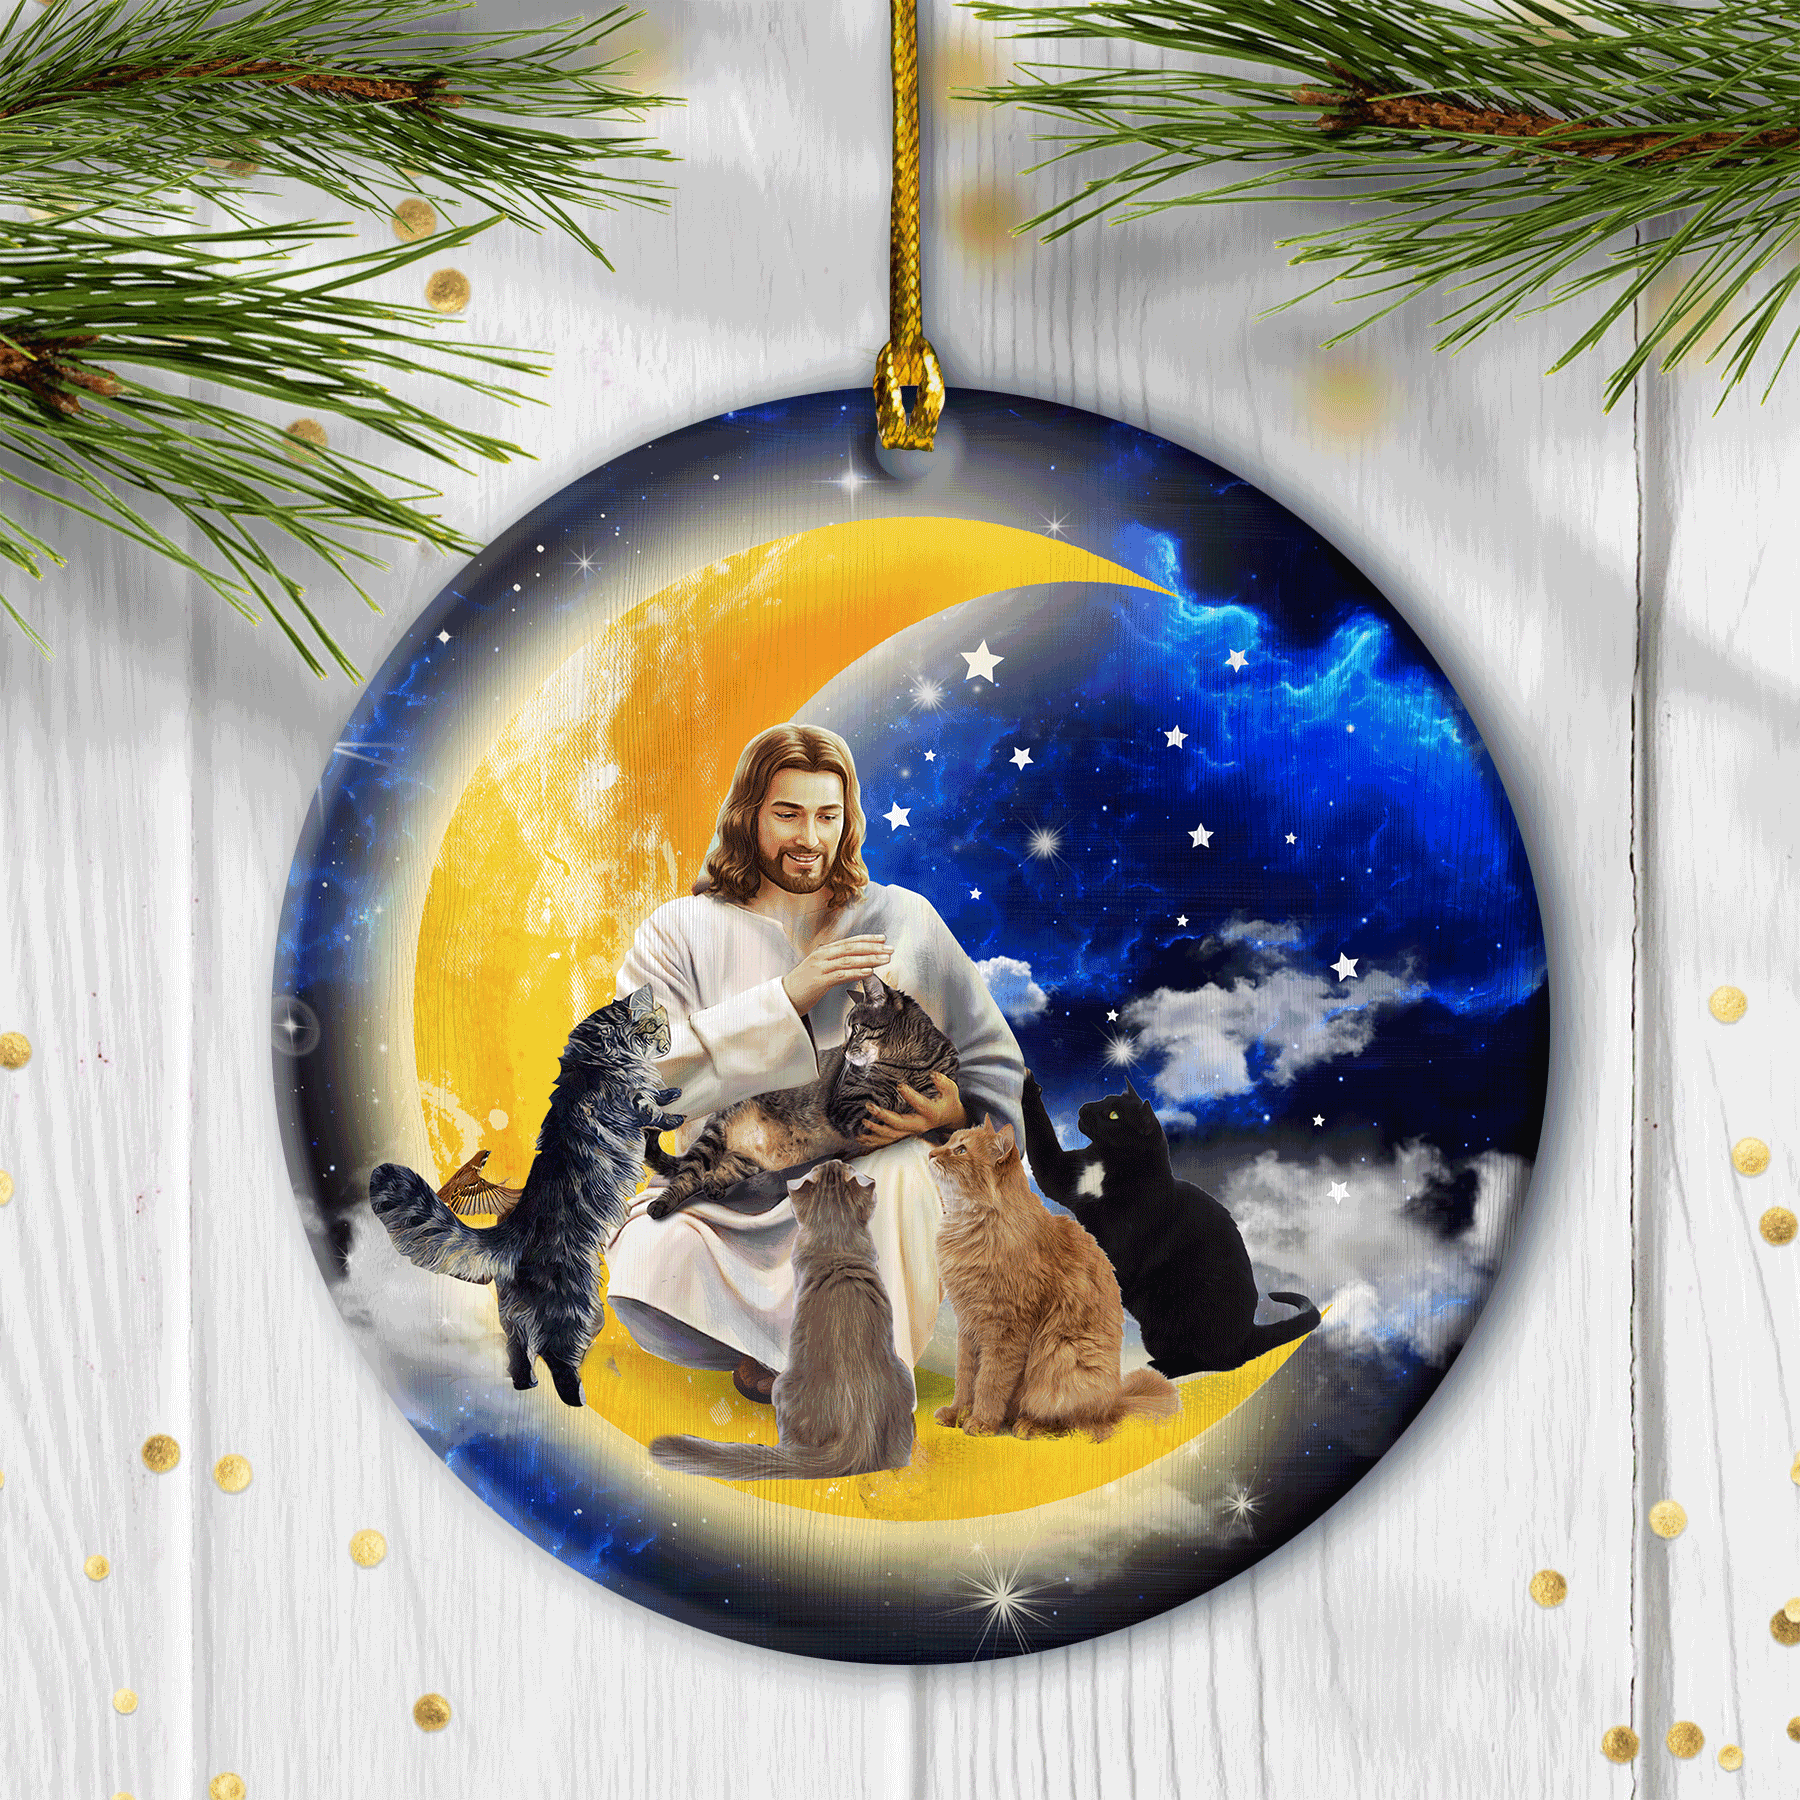 Jesus and The Cats - Ceramic Circle Ornament - The beautiful Night, Cute Cats - Jesus, God, Faith Painting - Gift for Religious Christian, Cat Lover